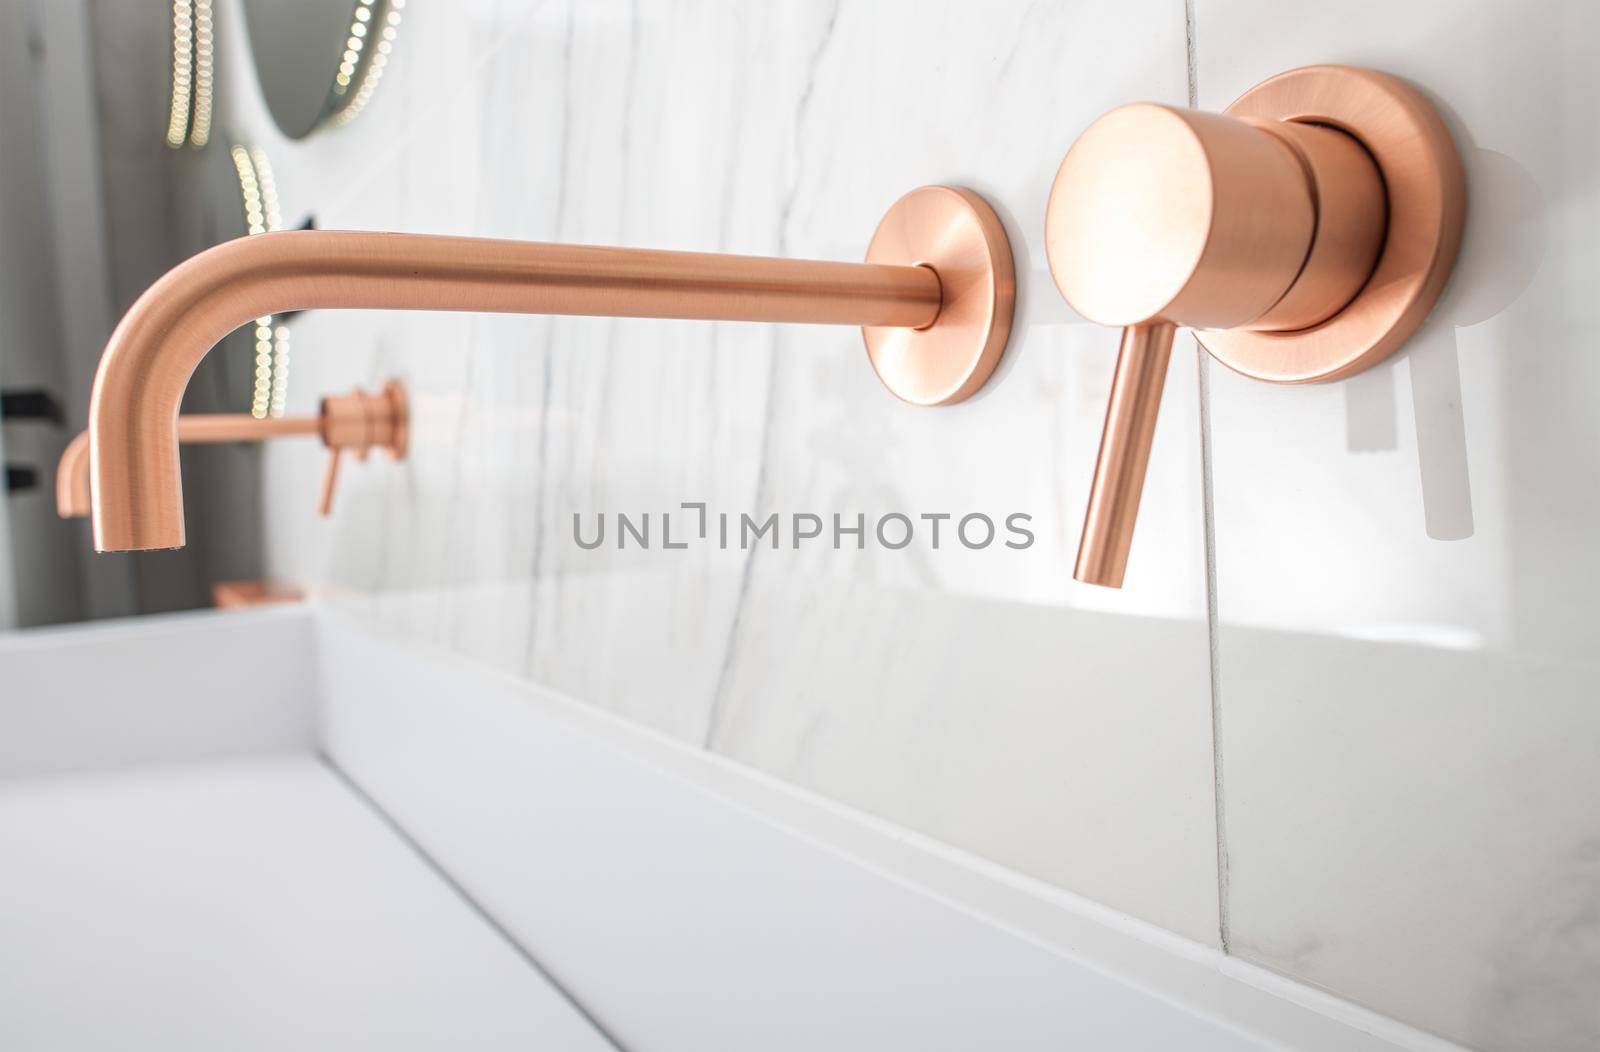 White Porcelain Sink With Copper Faucet, Knob, And Soap Dispenser. by welcomia